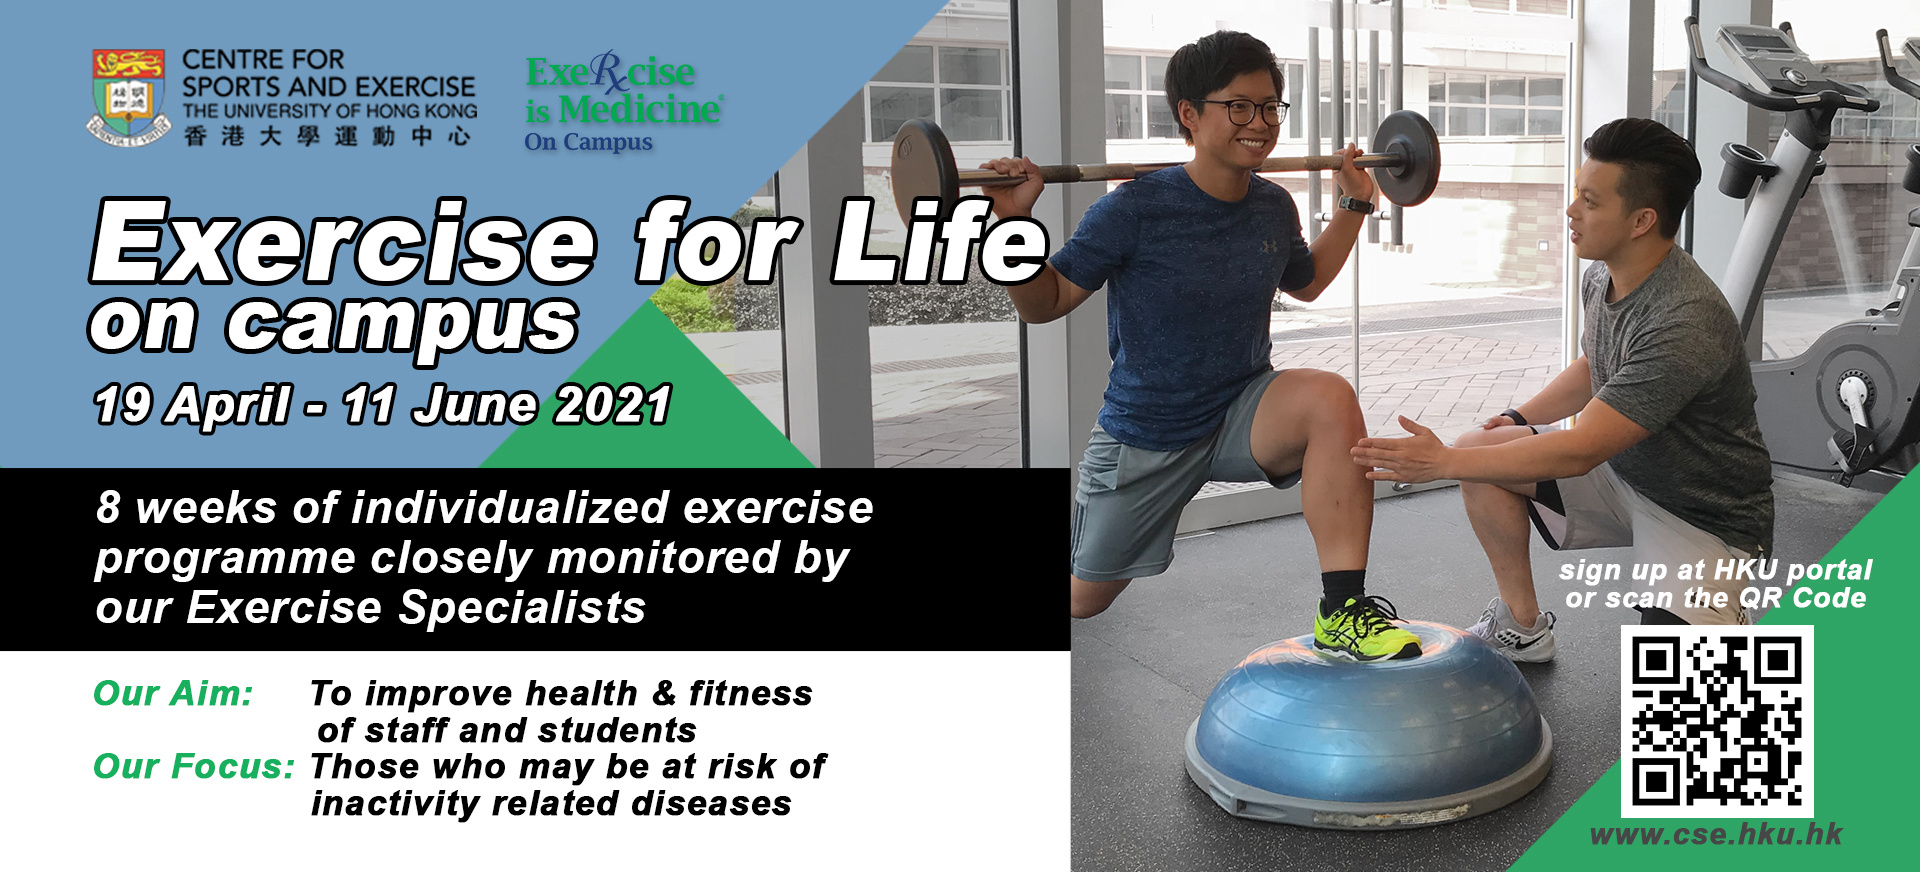  Exercise for Life on Campus Programme (Apr-Jun 2021)